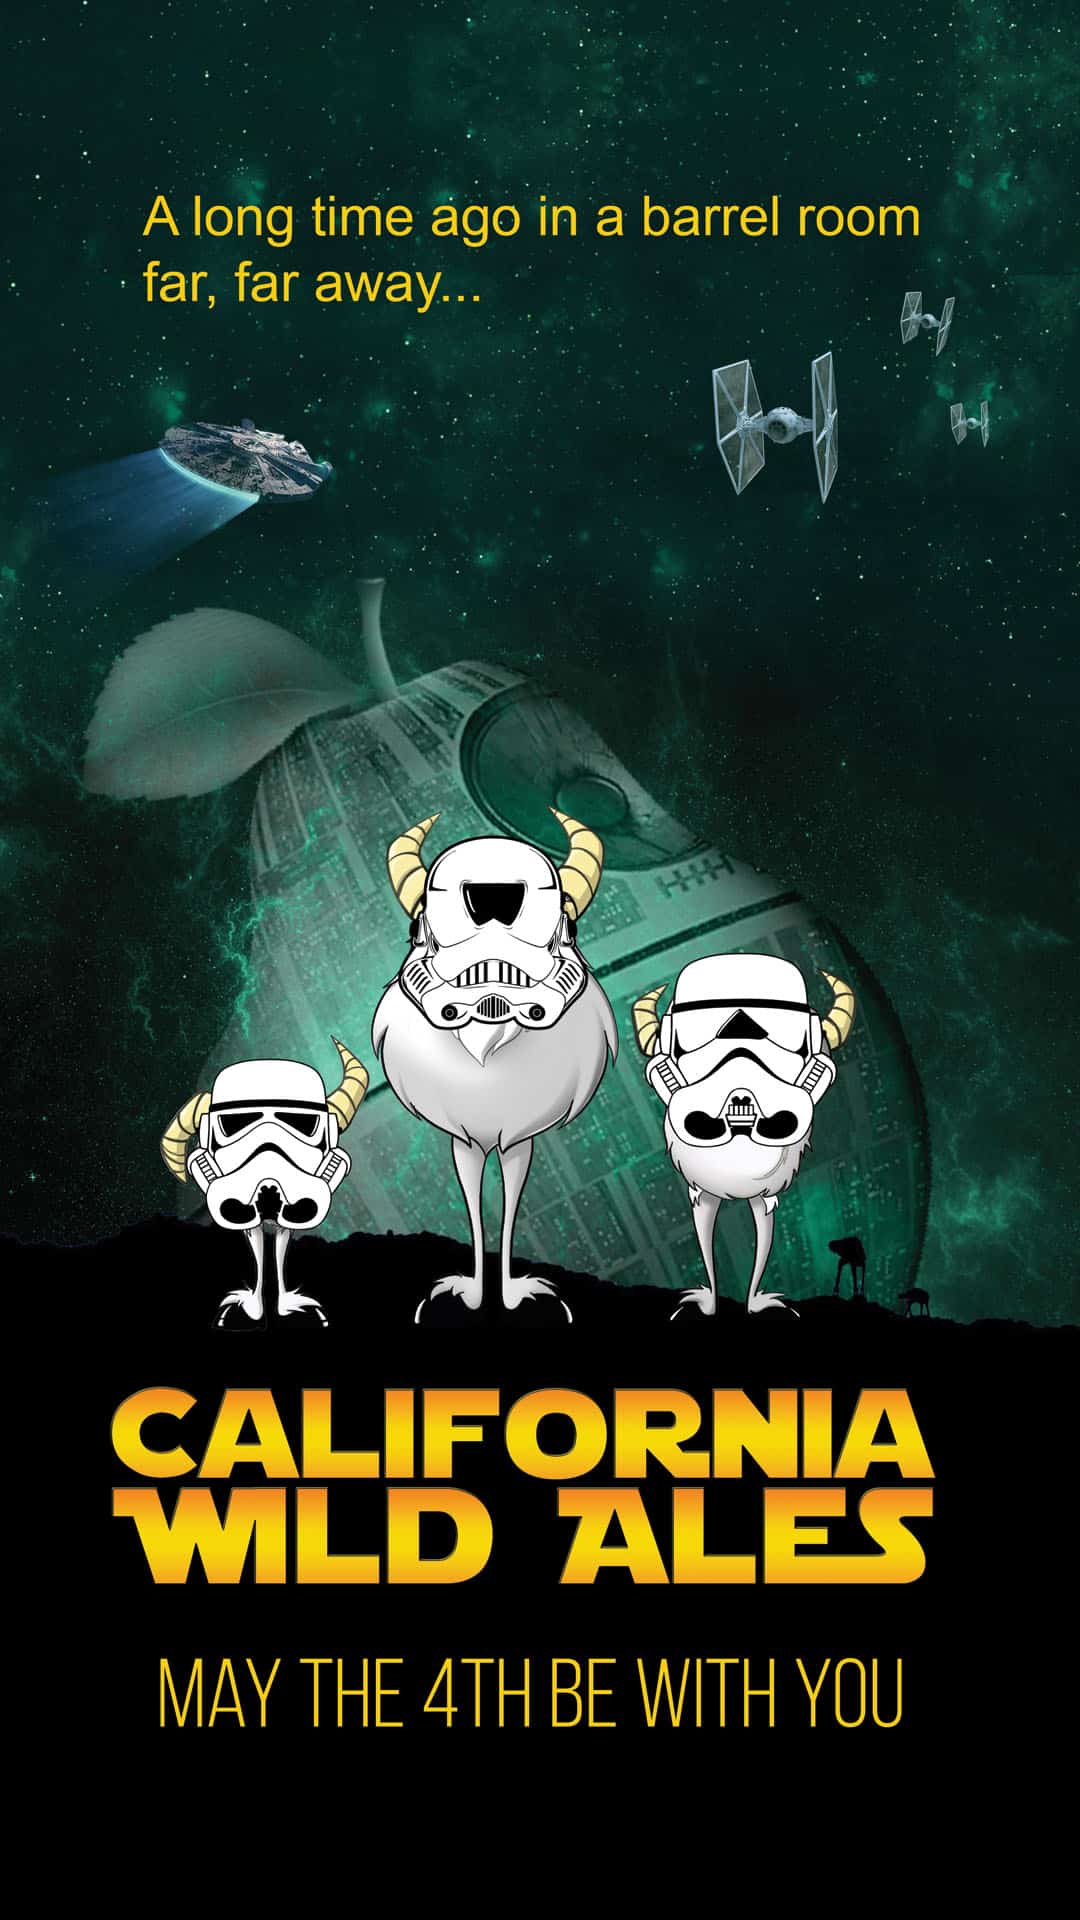 California Wild Ales - May the Fourth be With you Celebration